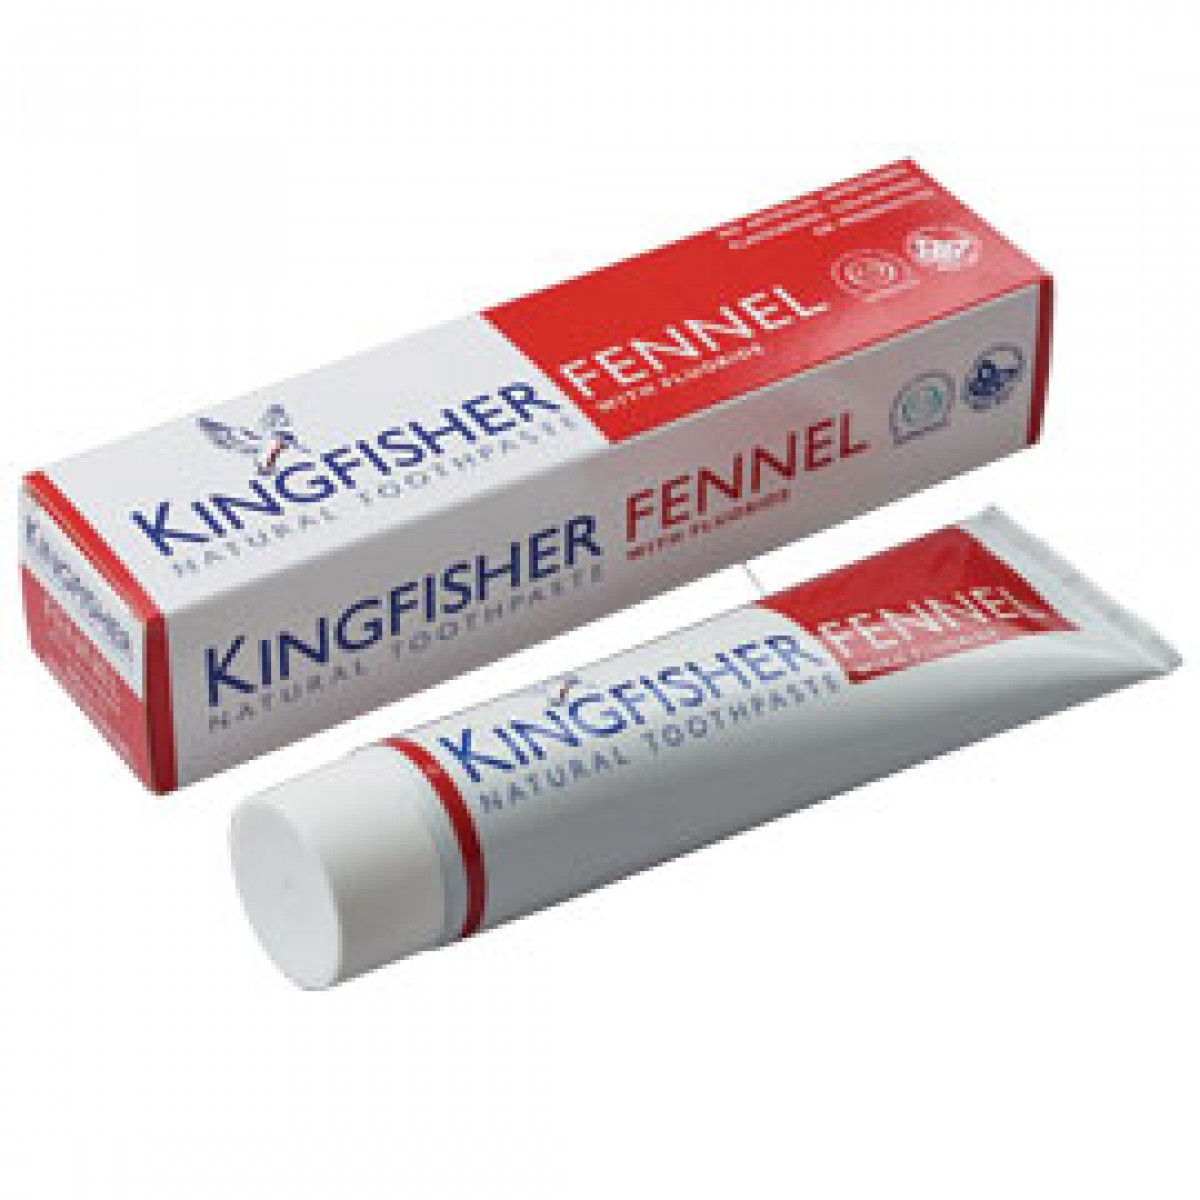 Product picture for Toothpaste - Fennel & Fluoride